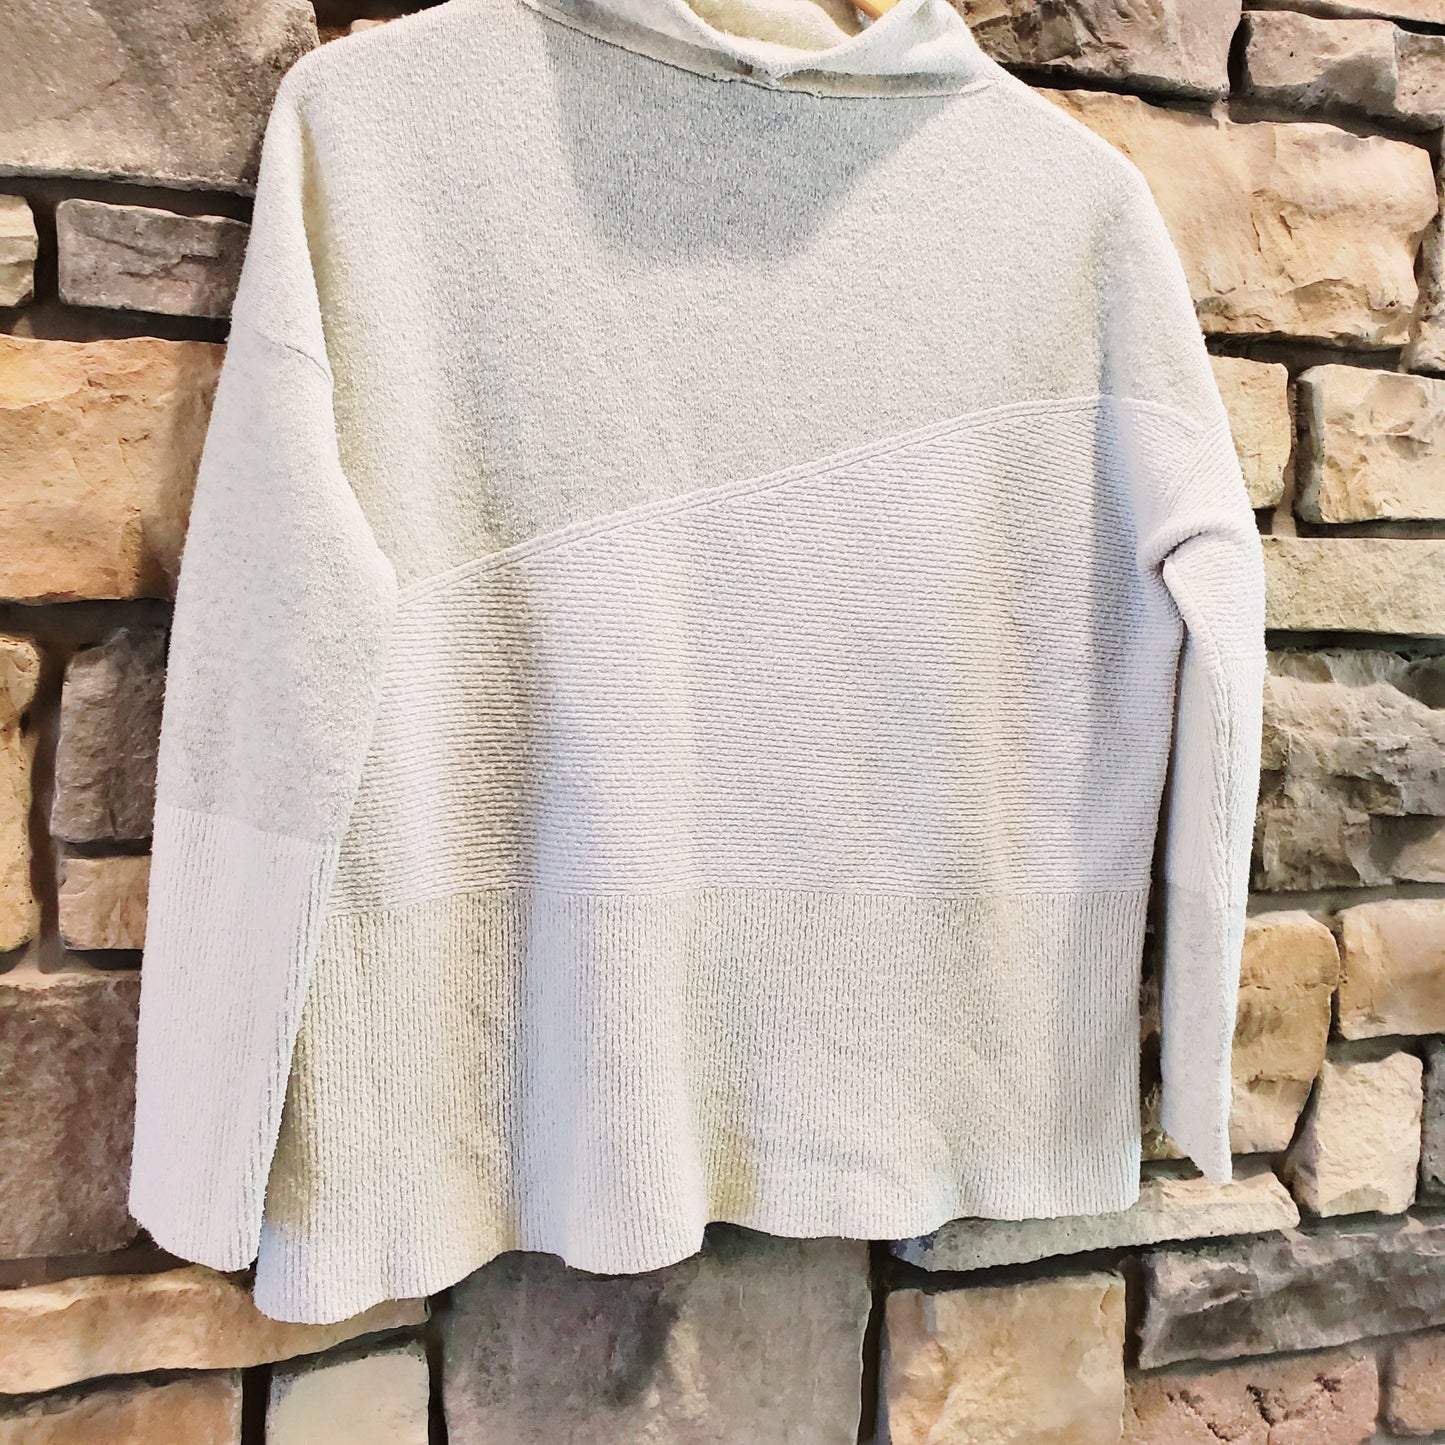 French Connection Sophia Patchwork Tonal Pullover - Color Blocked - Beige Multi/Light Oatmeal Melange - XS